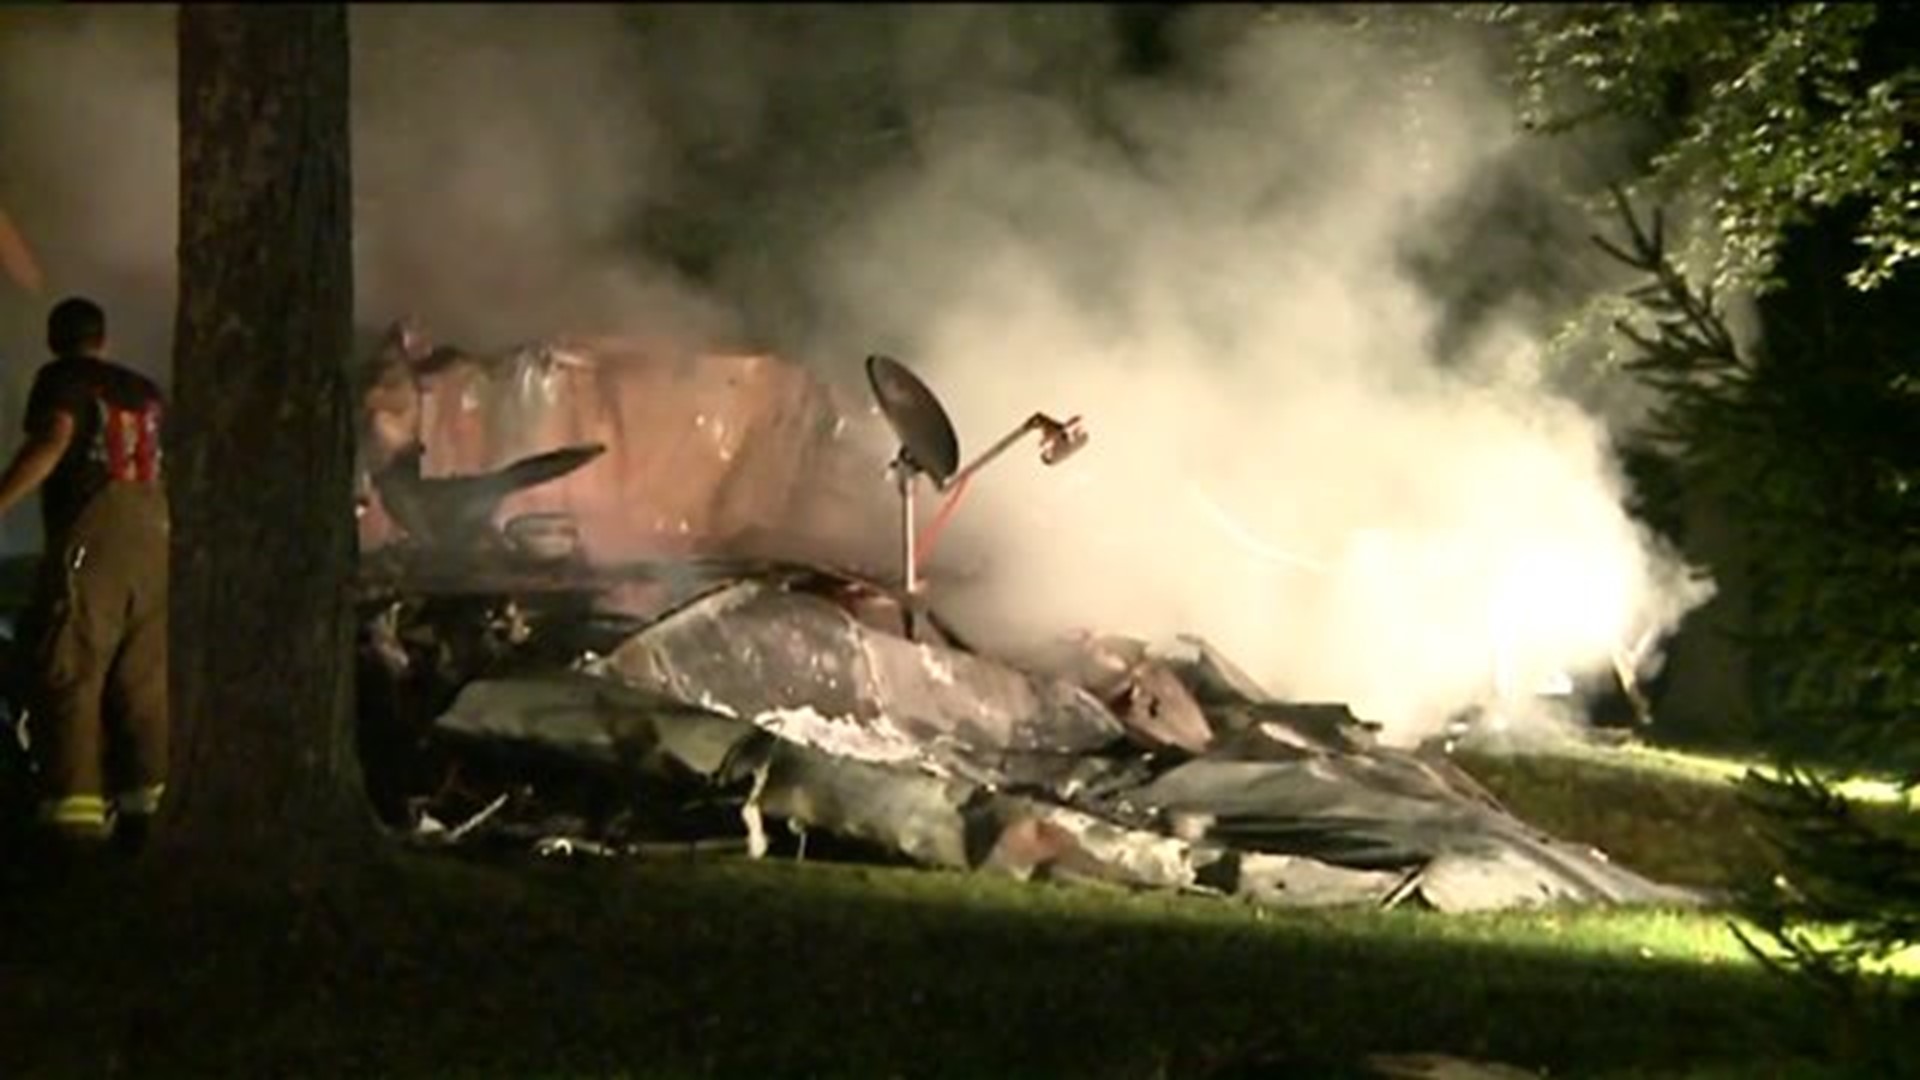 Mobile Home Completely Destroyed in Fire